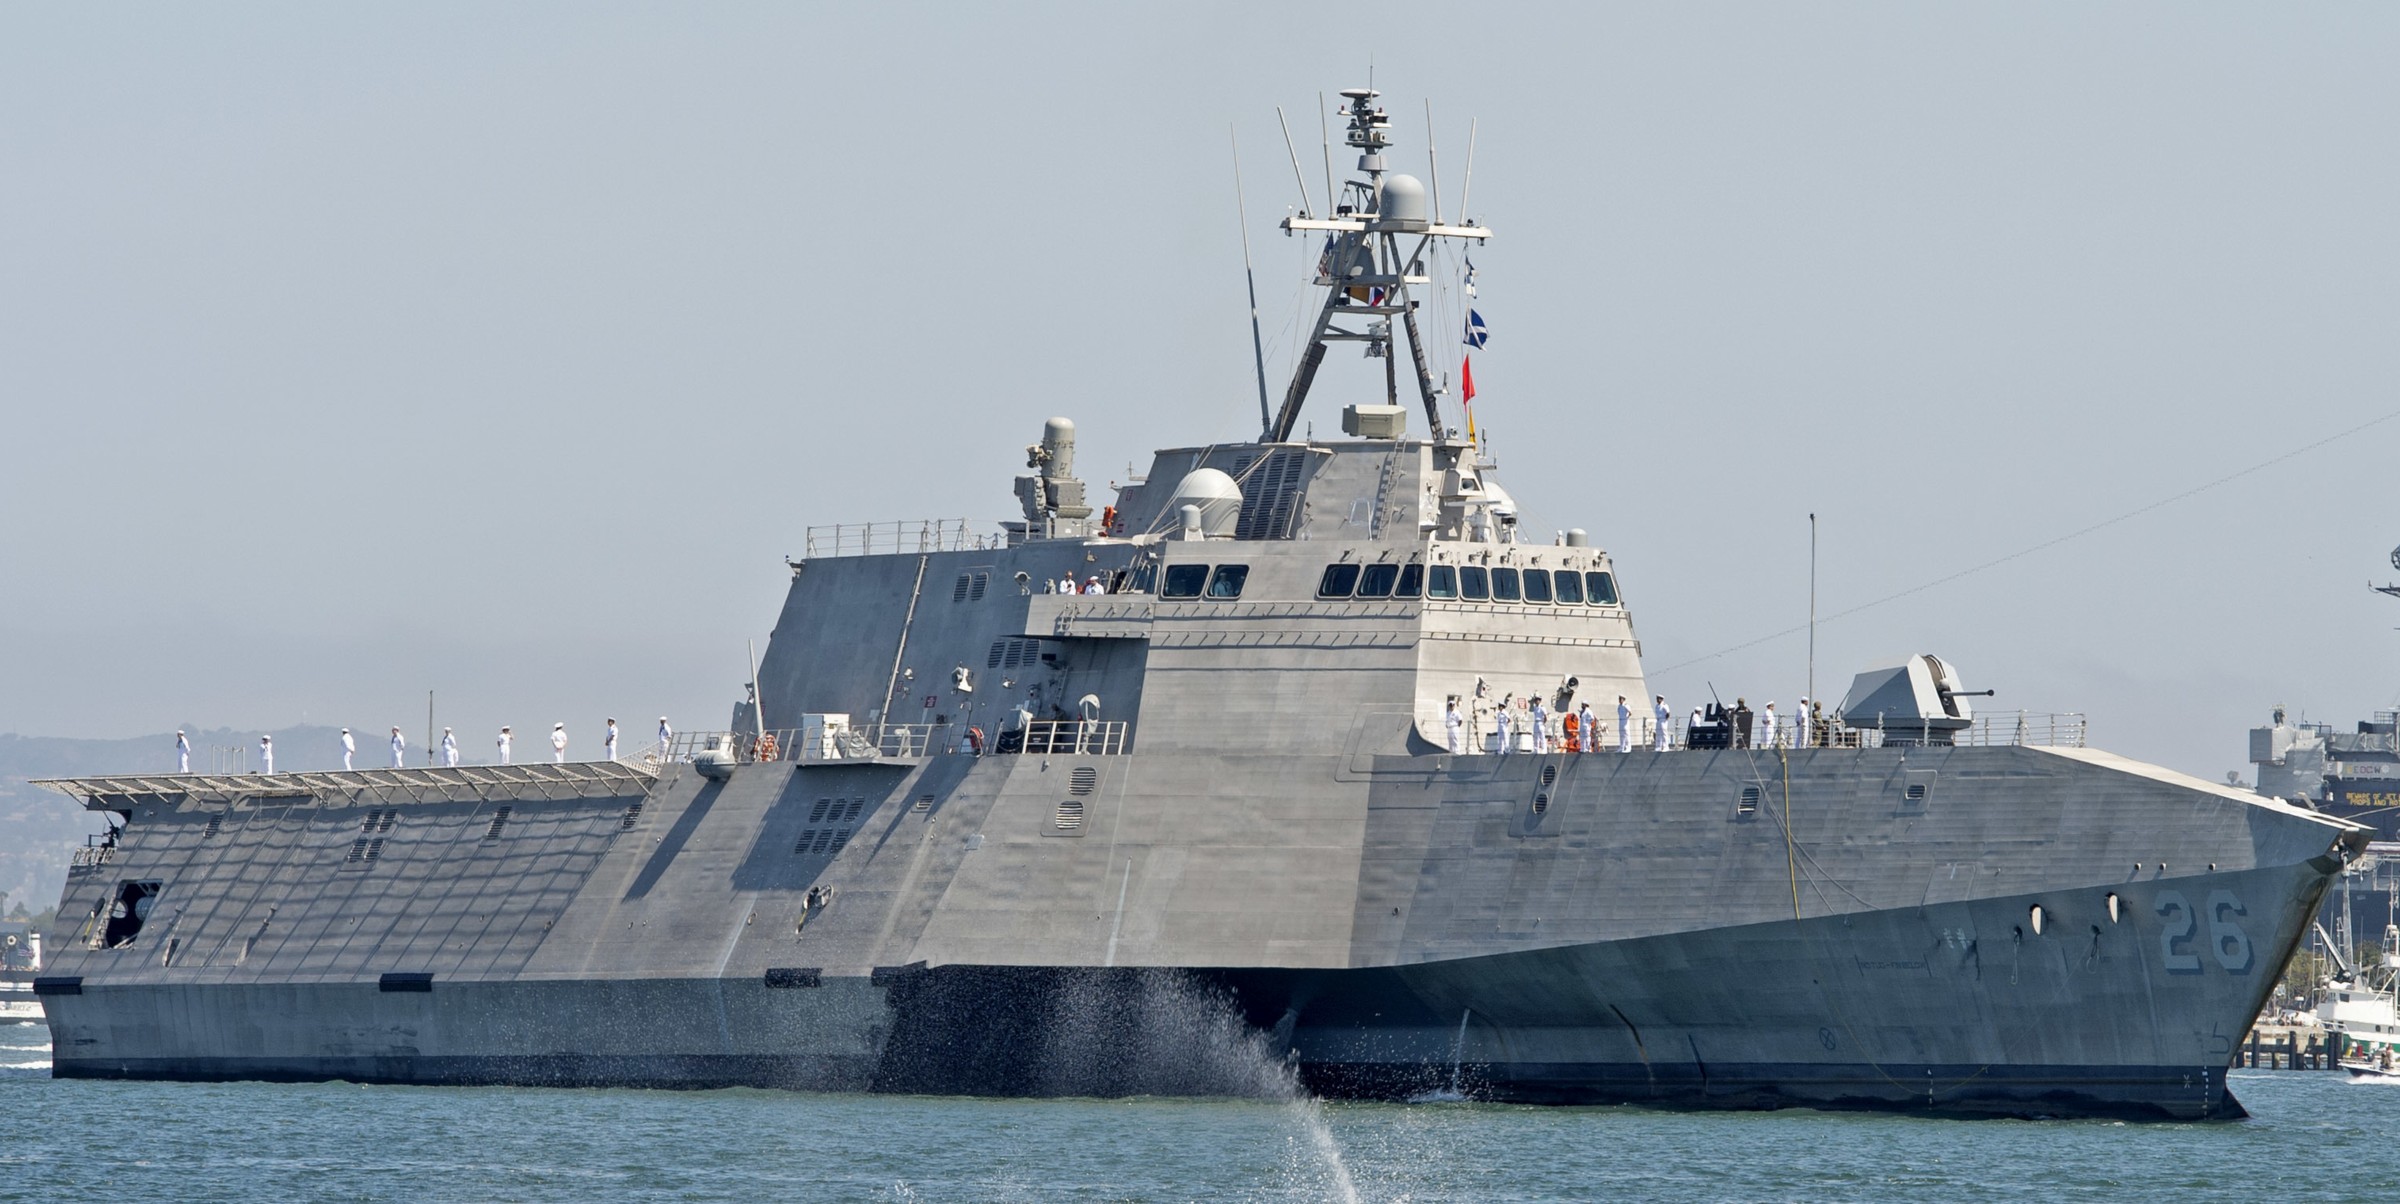 lcs-26 uss mobile independence class littoral combat ship us navy san diego california 10